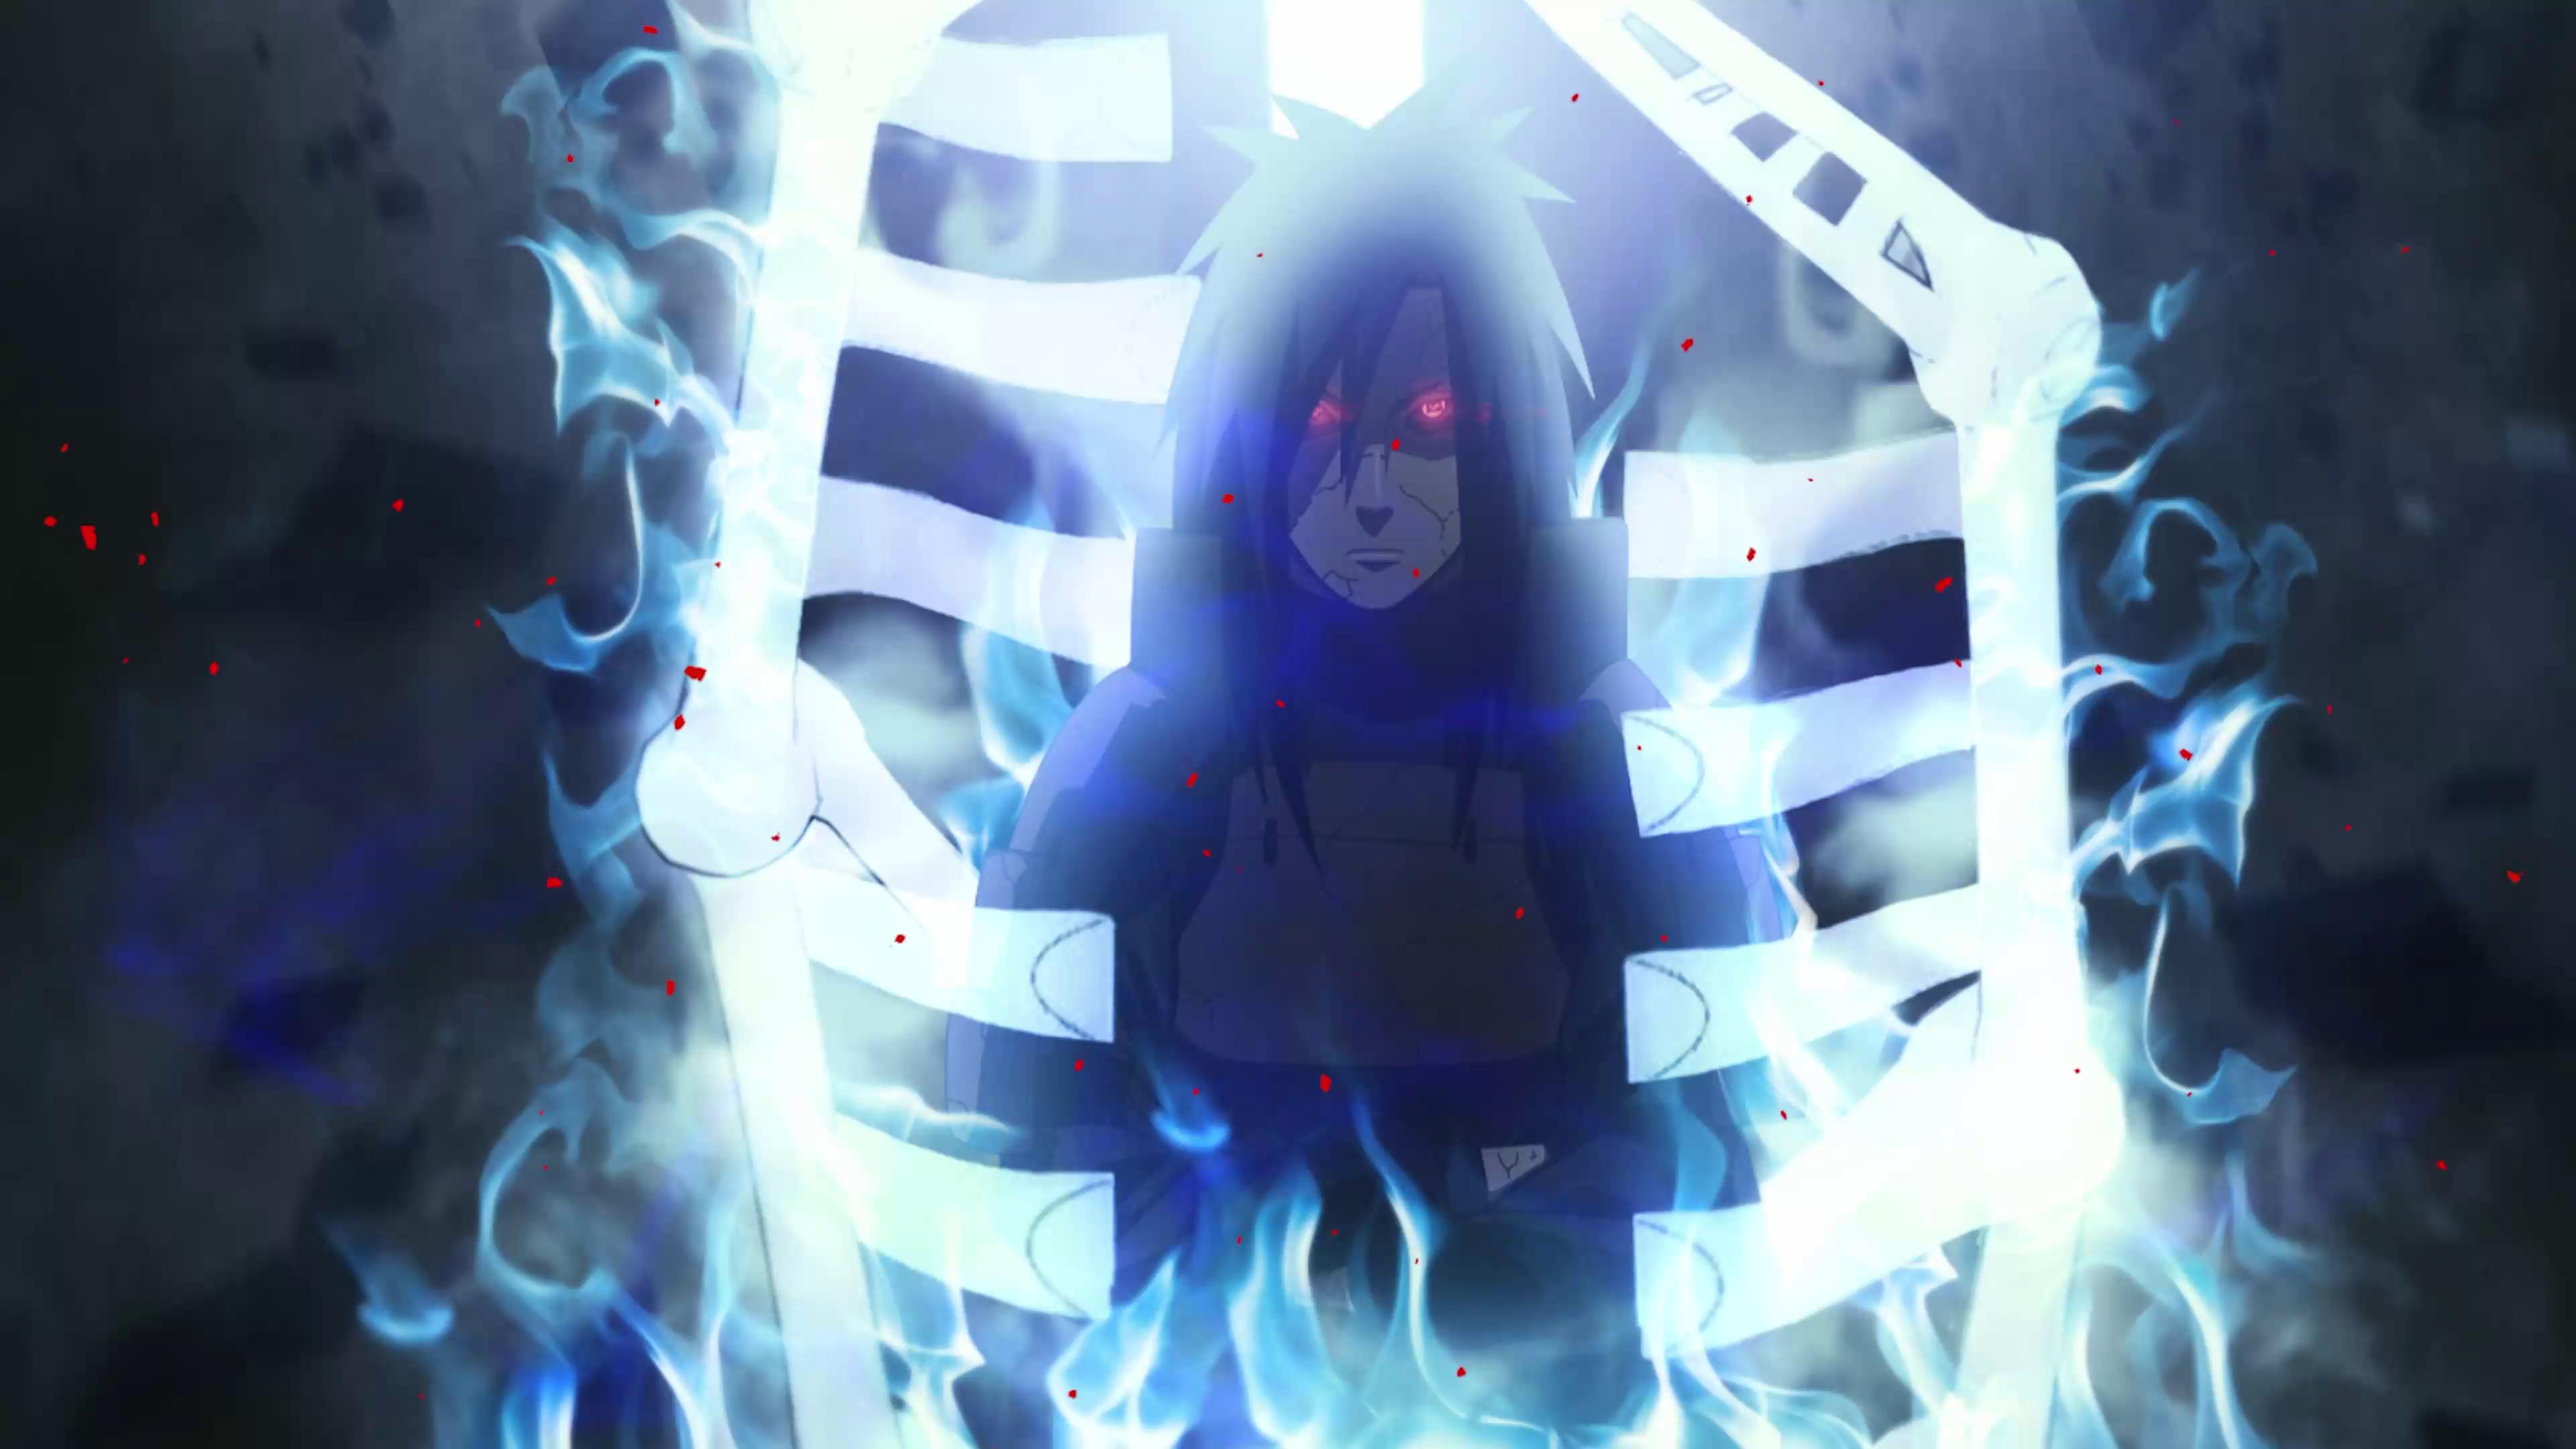 Download wallpapers 4k, Madara Uchiha, violet grunge background, Naruto  characters, protagonist, Naruto, vortex, Uchiha Madara, samurai, manga, Madara  Uchiha Naruto for desktop free. Pictures for desktop free